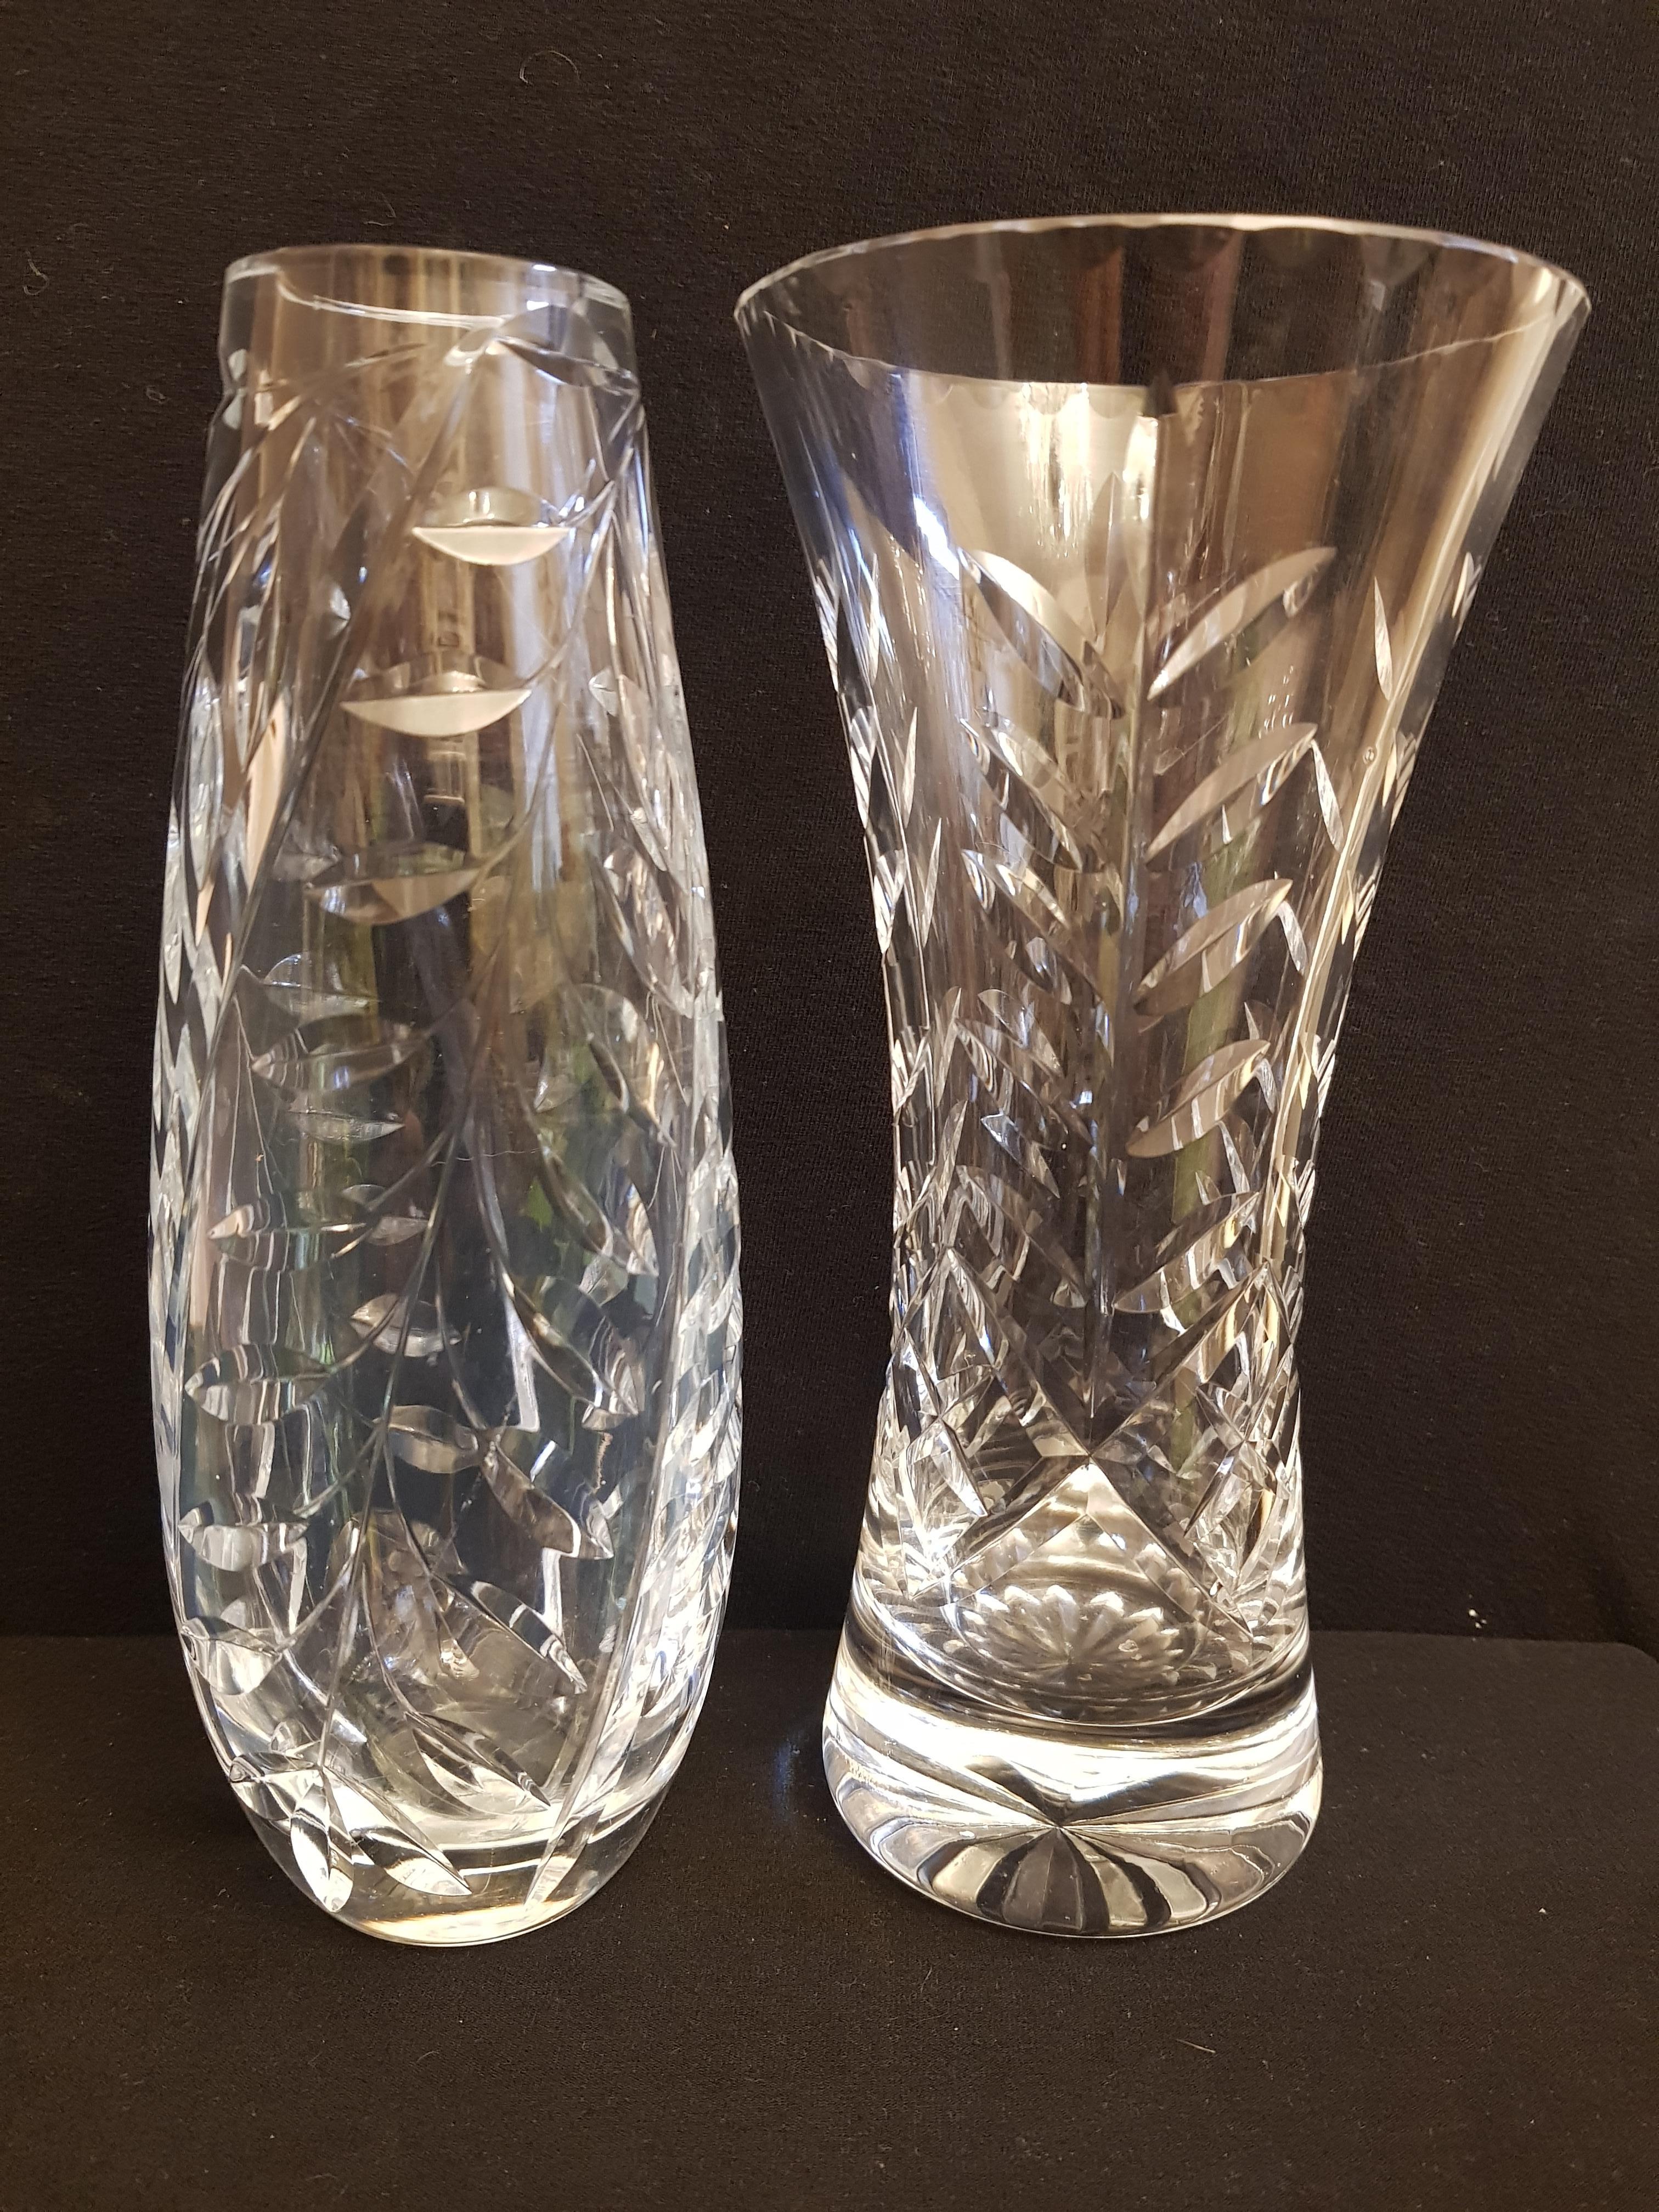 Beautiful vitange set of two hand cut crystal ases made in italy perfect condition beautiful home decor.